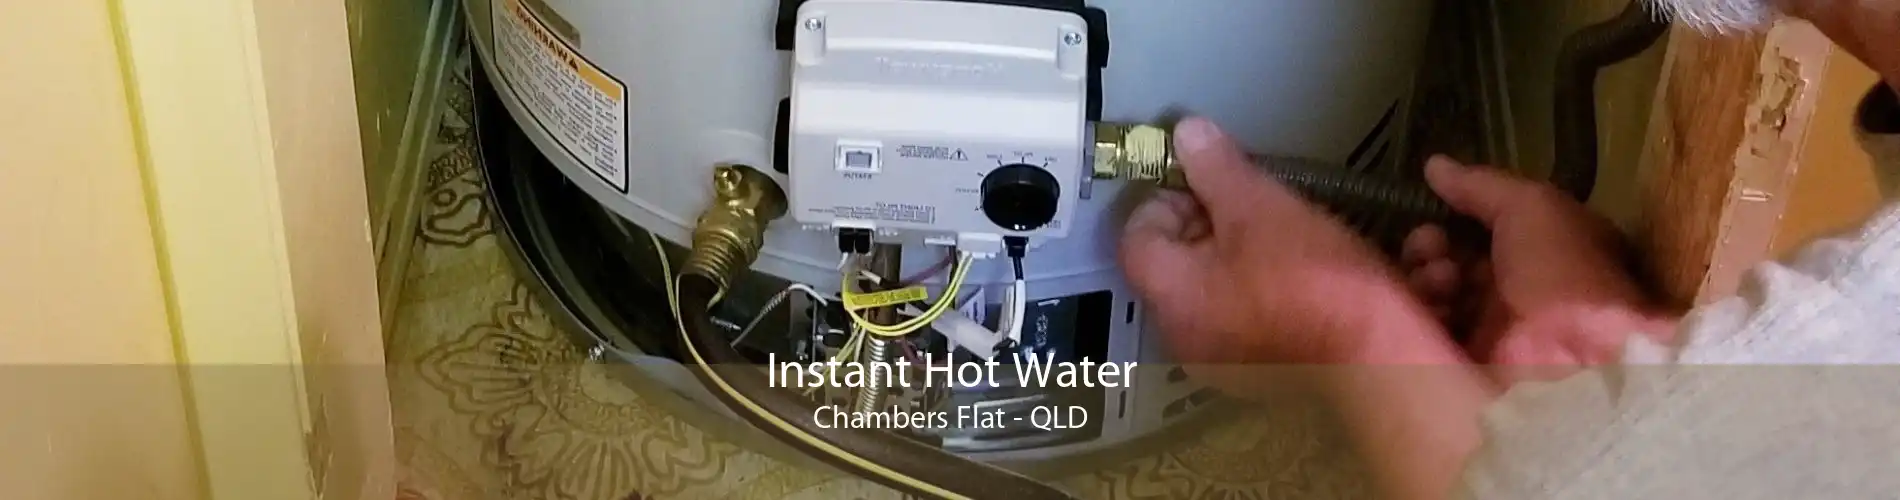 Instant Hot Water Chambers Flat - QLD